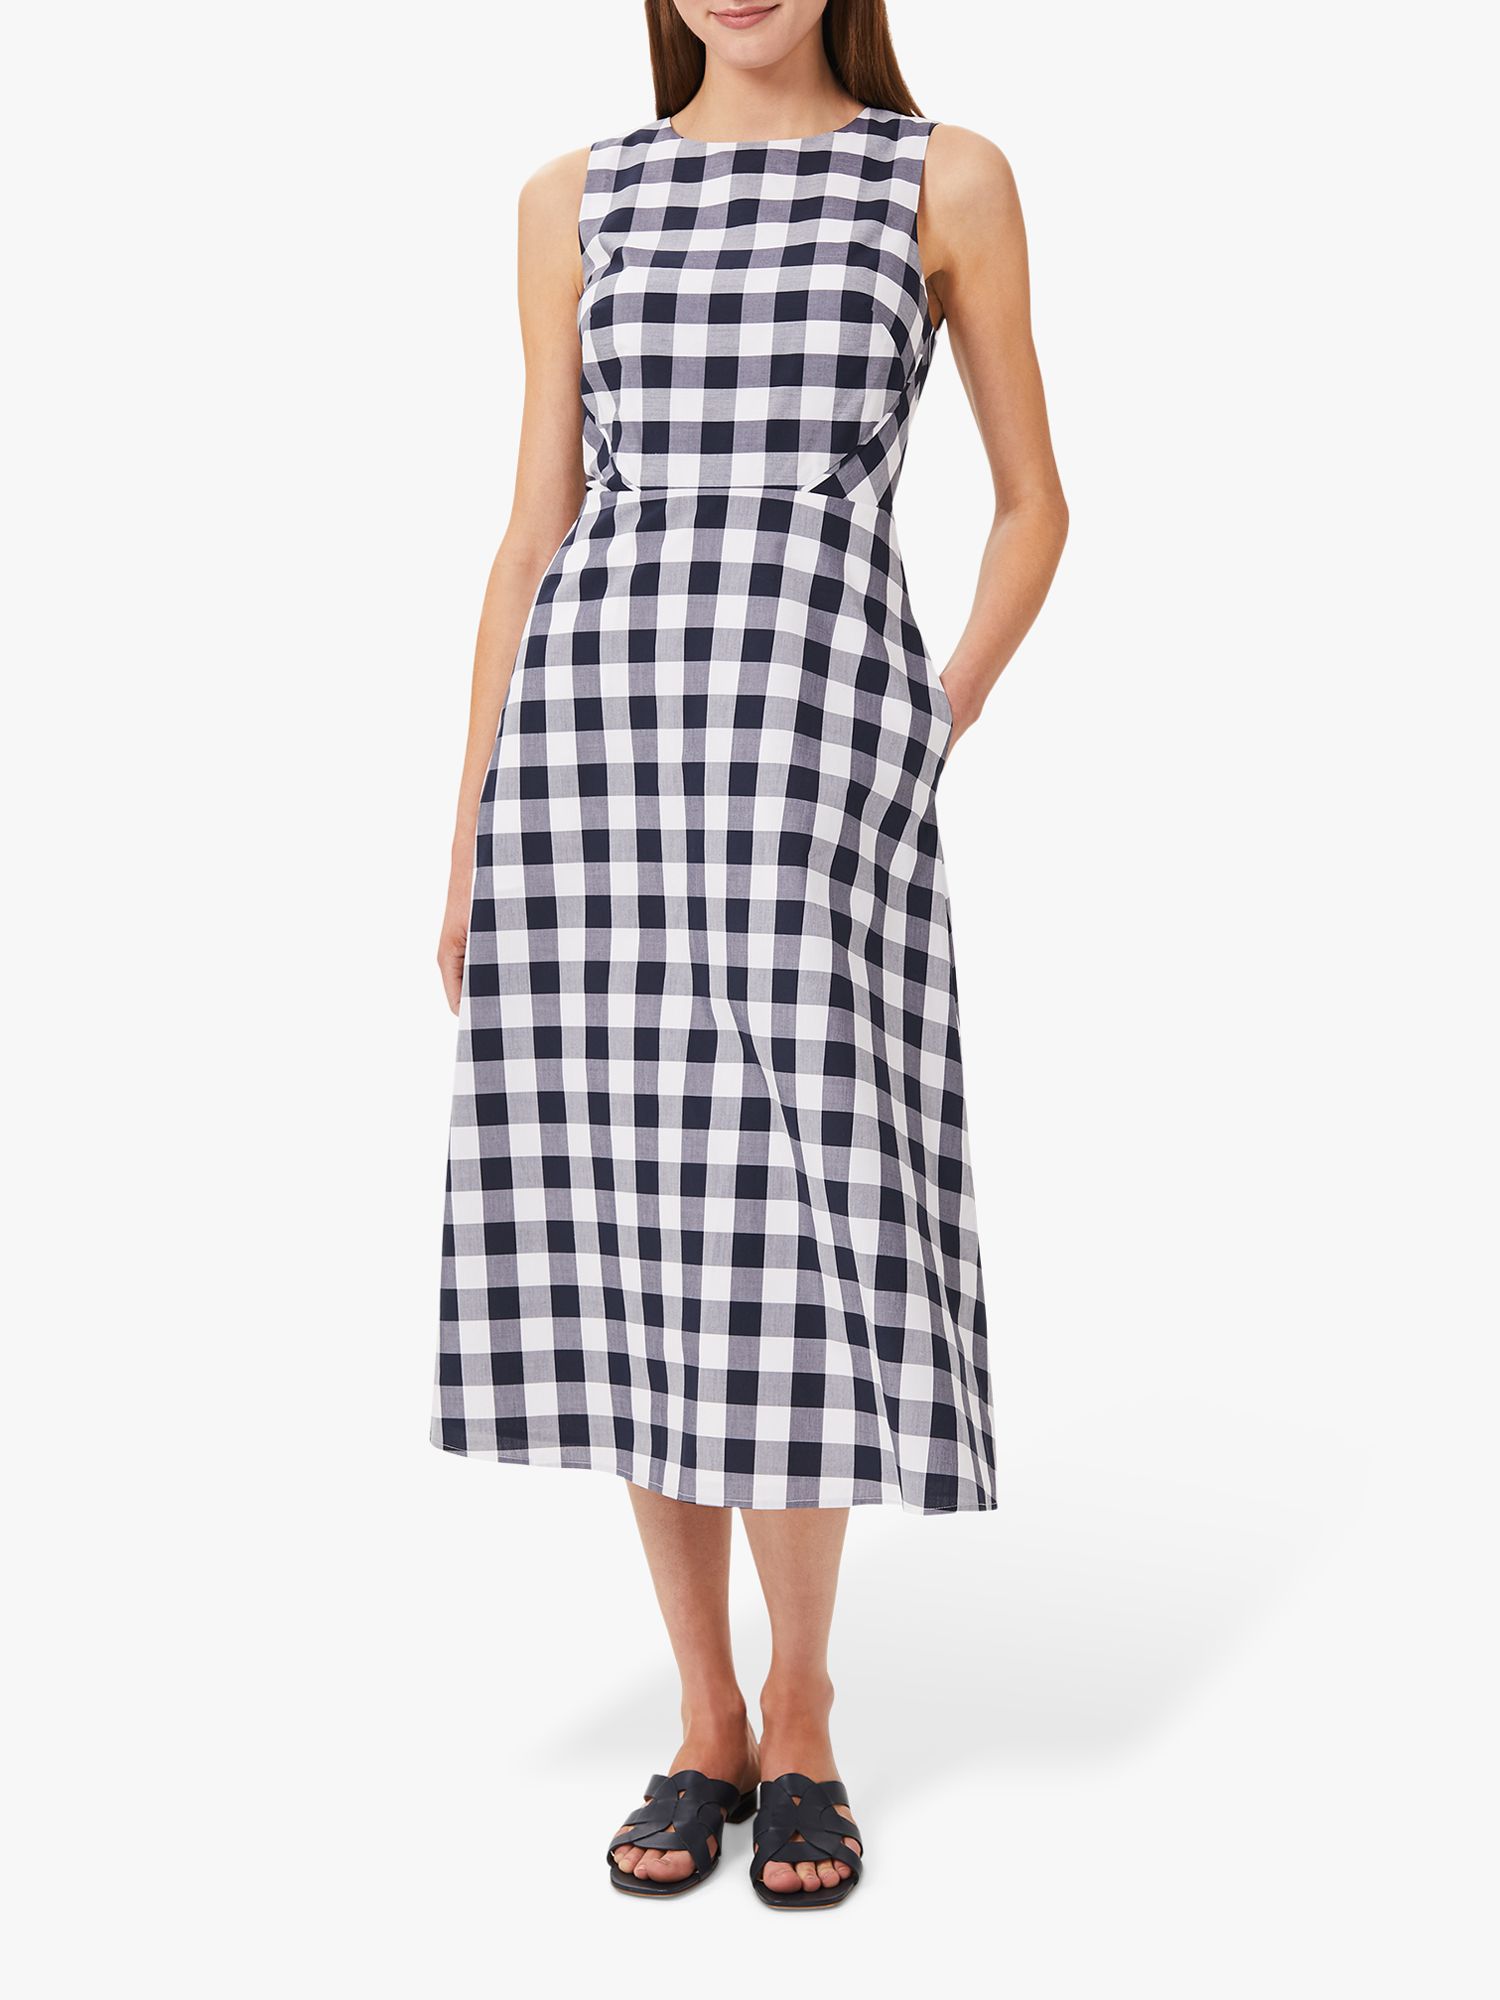 Best Gingham Dresses: 19 Gingham Dresses That Are Pure, 43% OFF